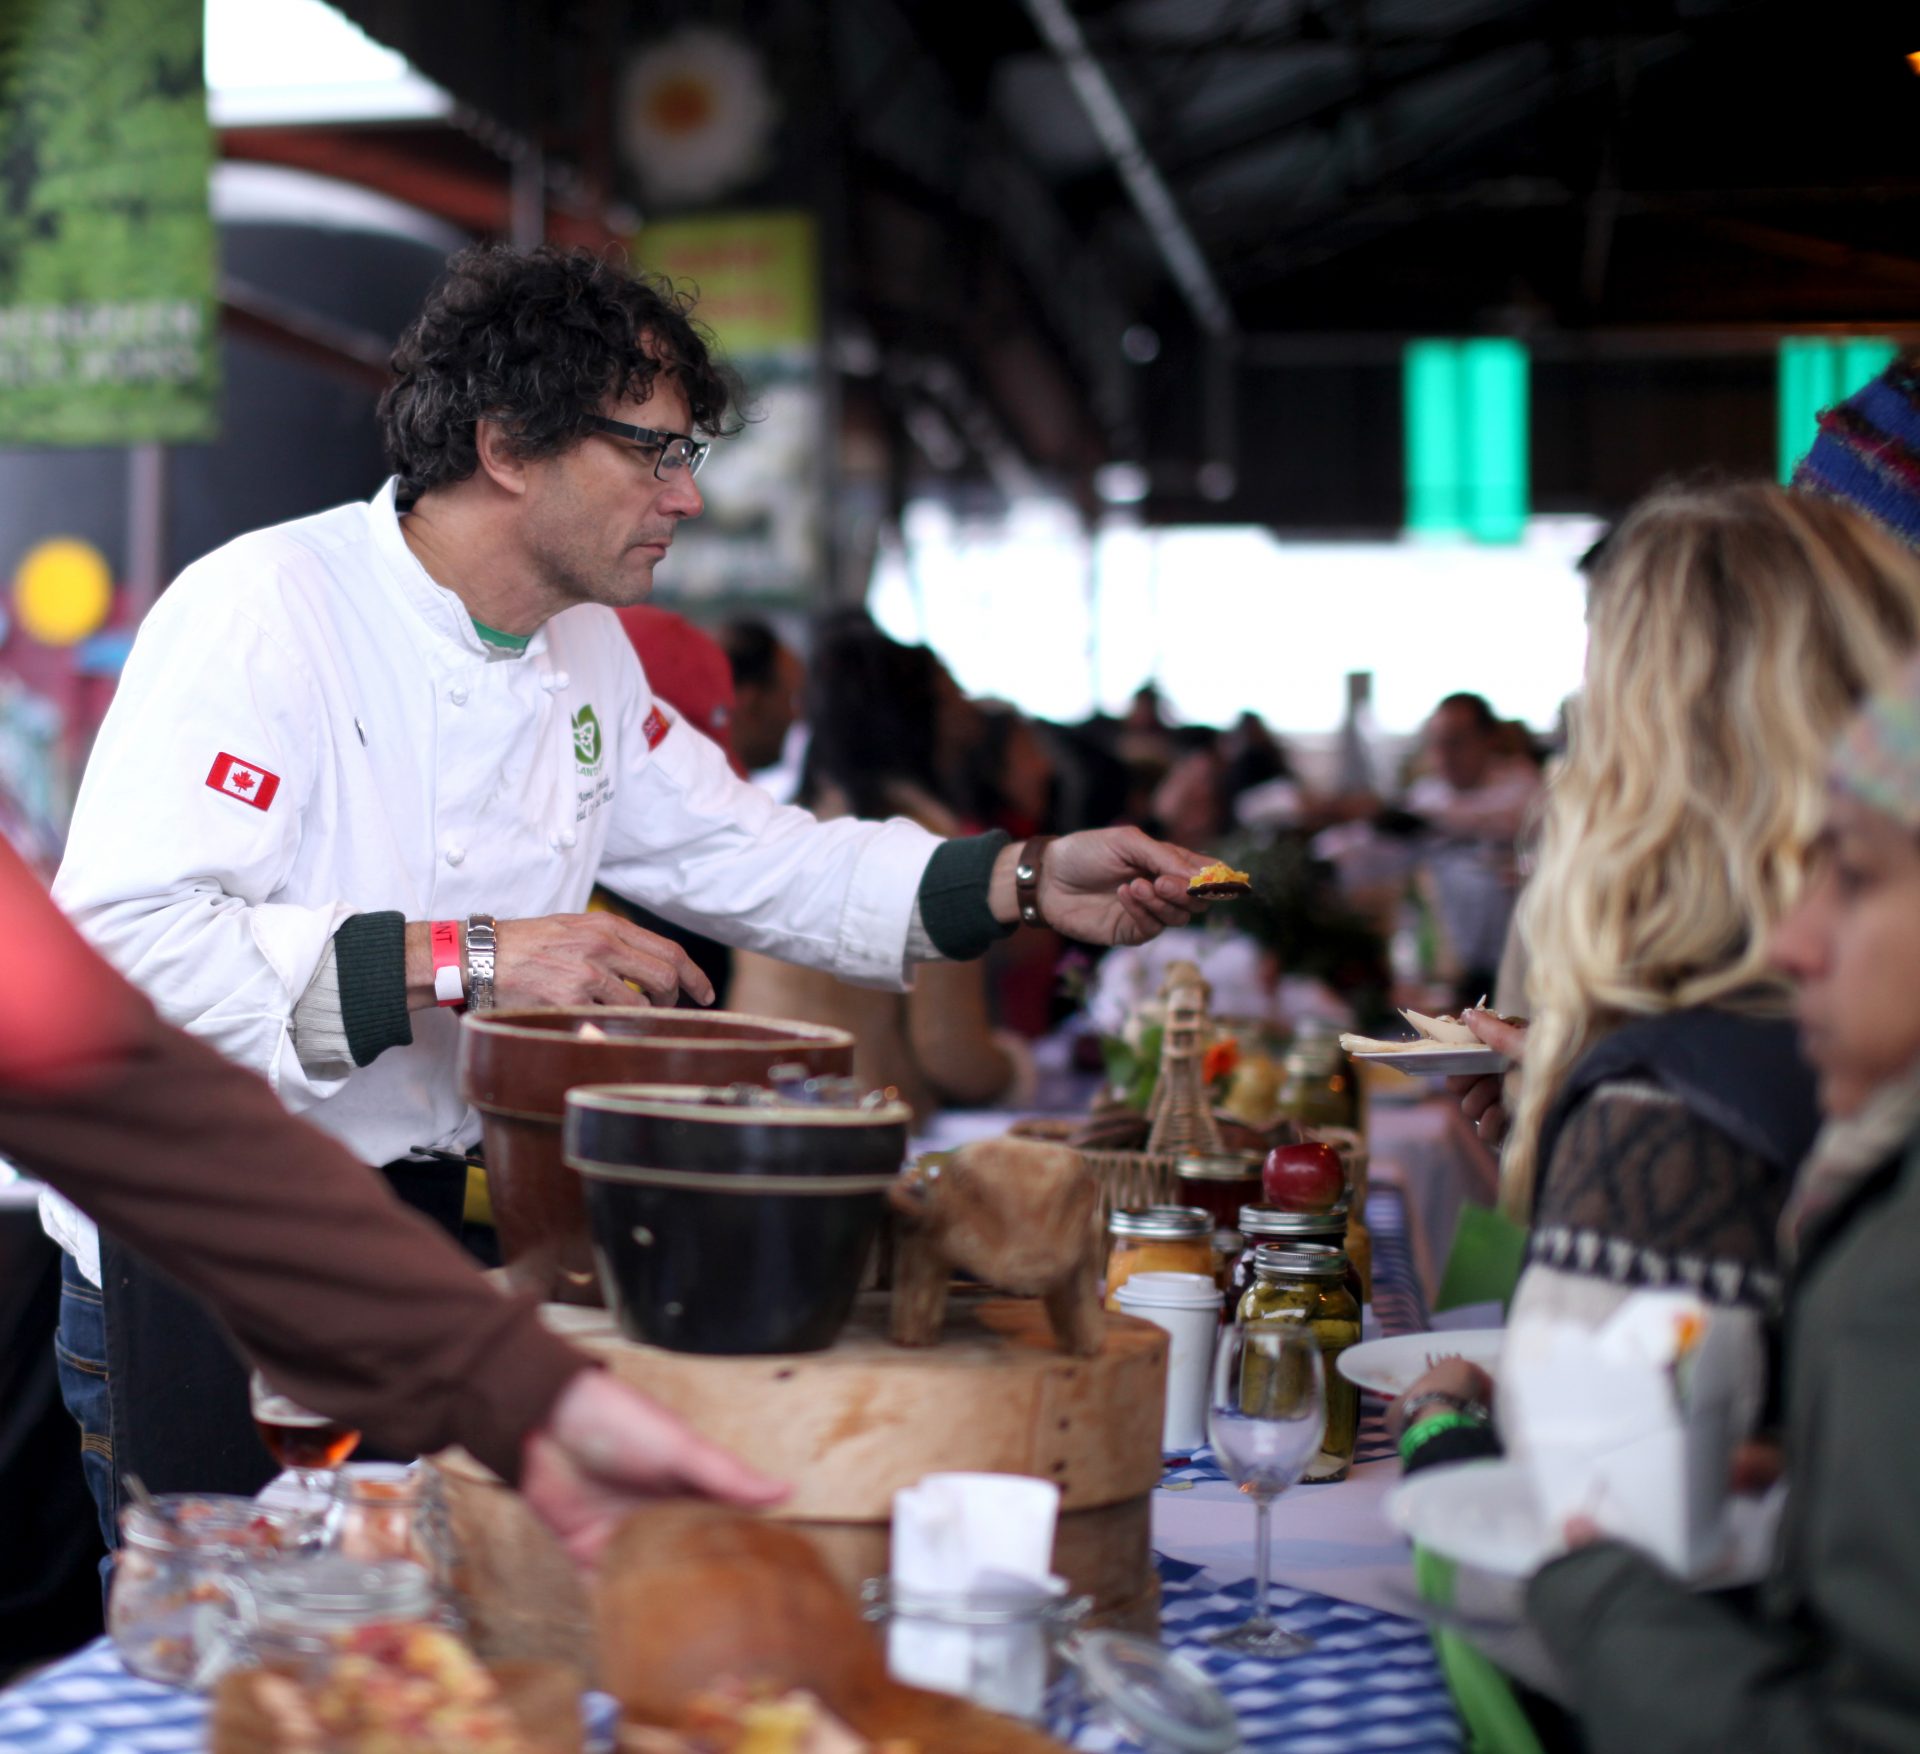 Food and Workers of Brickworks Picnic 2011 – A Photo Album